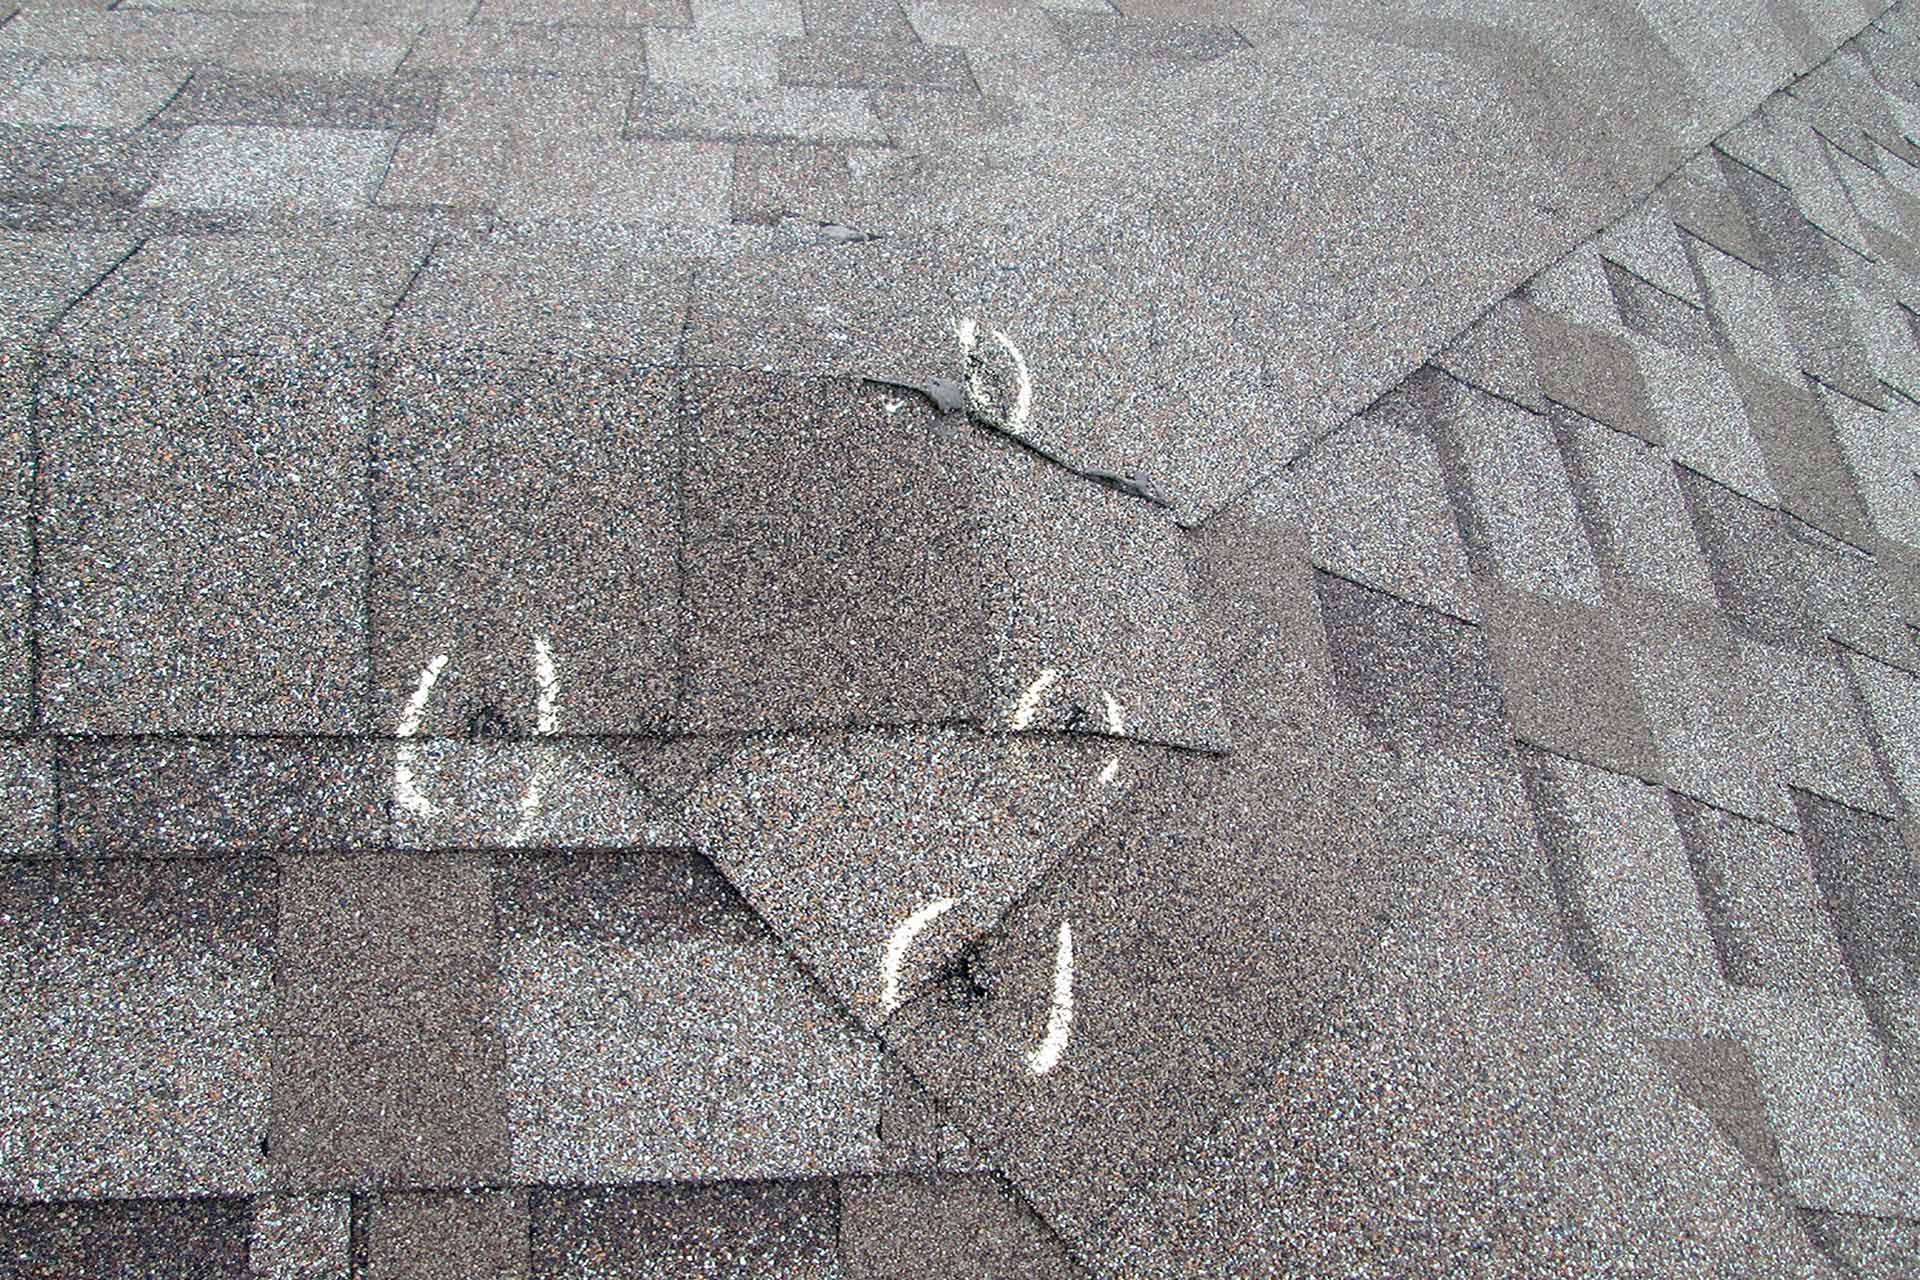 A home roof's shingles with hail damage near Lakeland, FL.